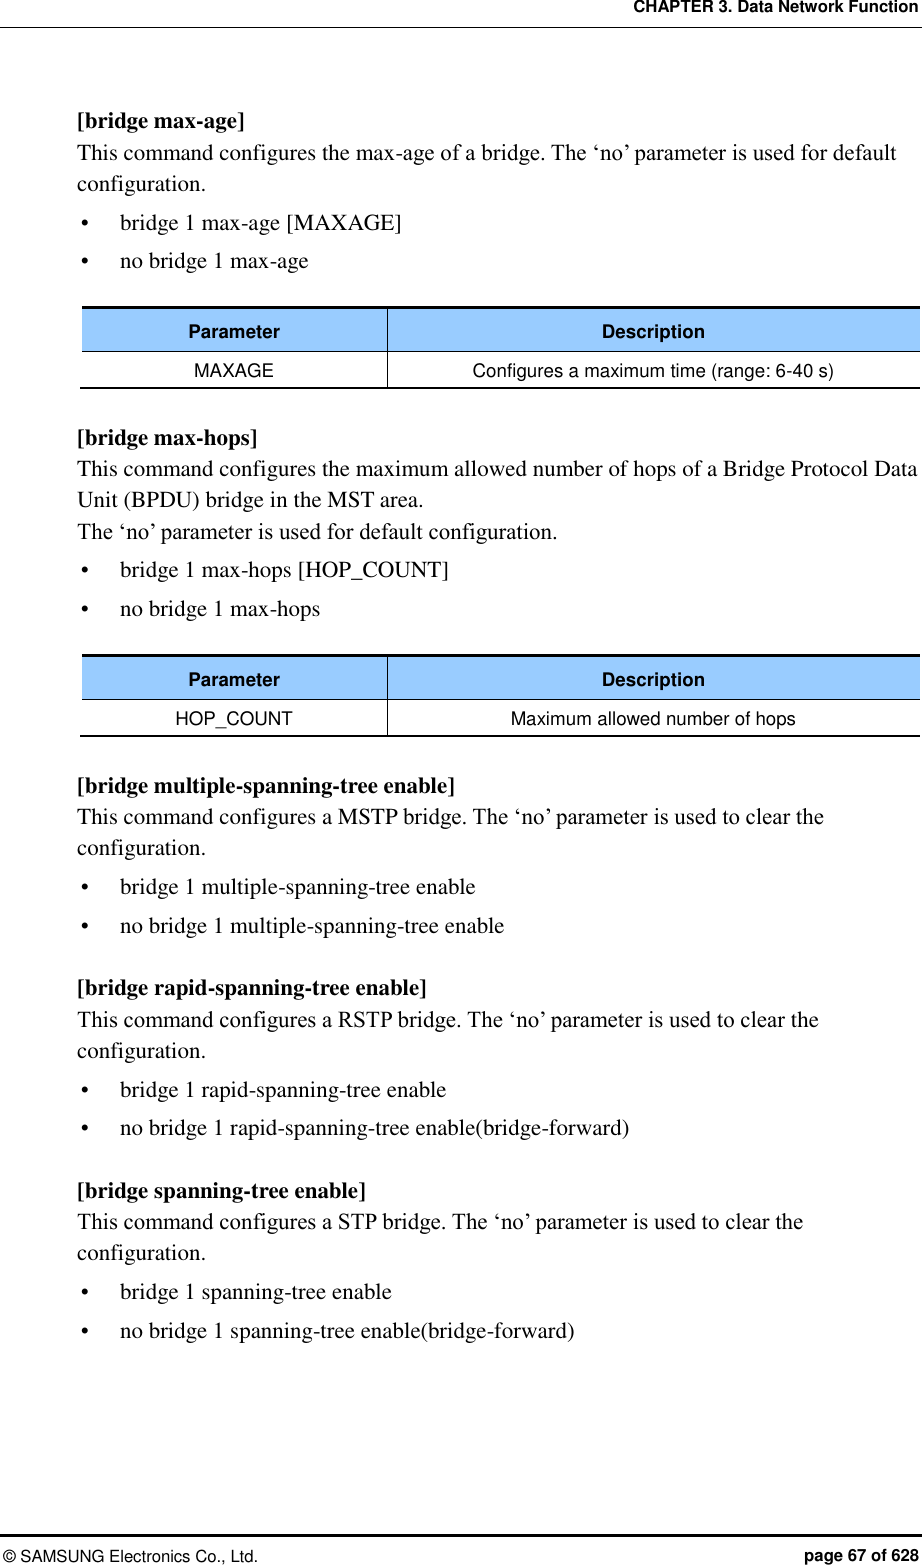 CHAPTER 3. Data Network Function ©  SAMSUNG Electronics Co., Ltd.  page 67 of 628 [bridge max-age] This command configures the max-age of a bridge. The ‘no’ parameter is used for default configuration.  bridge 1 max-age [MAXAGE]  no bridge 1 max-age  Parameter Description MAXAGE Configures a maximum time (range: 6-40 s)  [bridge max-hops] This command configures the maximum allowed number of hops of a Bridge Protocol Data Unit (BPDU) bridge in the MST area.   The ‘no’ parameter is used for default configuration.  bridge 1 max-hops [HOP_COUNT]  no bridge 1 max-hops  Parameter Description HOP_COUNT Maximum allowed number of hops  [bridge multiple-spanning-tree enable] This command configures a MSTP bridge. The ‘no’ parameter is used to clear the configuration.  bridge 1 multiple-spanning-tree enable  no bridge 1 multiple-spanning-tree enable  [bridge rapid-spanning-tree enable] This command configures a RSTP bridge. The ‘no’ parameter is used to clear the configuration.  bridge 1 rapid-spanning-tree enable    no bridge 1 rapid-spanning-tree enable(bridge-forward)  [bridge spanning-tree enable] This command configures a STP bridge. The ‘no’ parameter is used to clear the configuration.  bridge 1 spanning-tree enable    no bridge 1 spanning-tree enable(bridge-forward)  